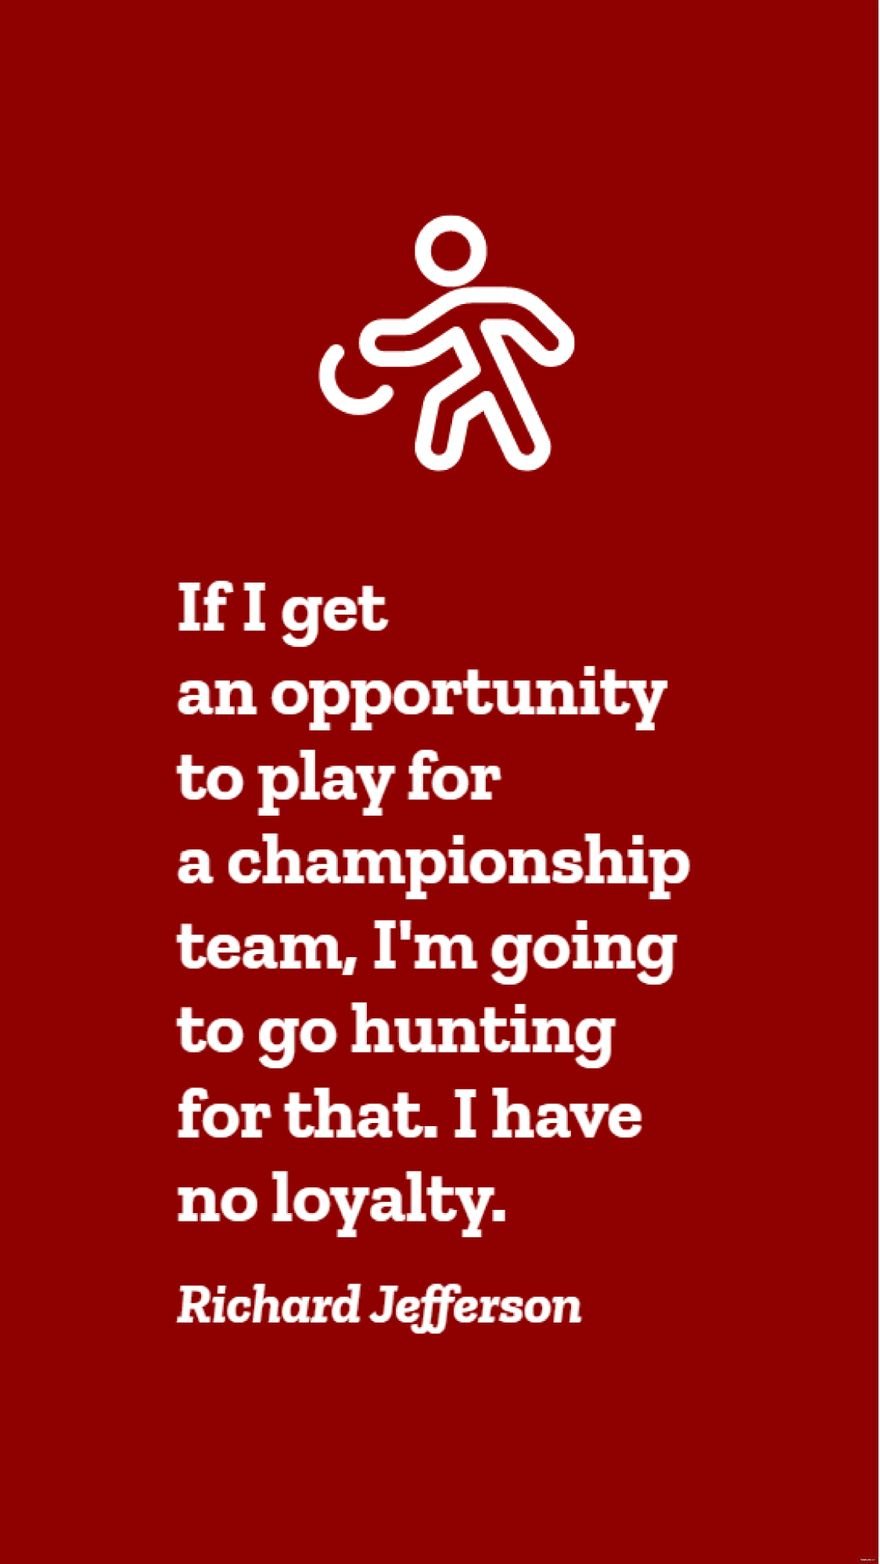 Richard Jefferson - If I get an opportunity to play for a championship team, I'm going to go hunting for that. I have no loyalty. in JPG